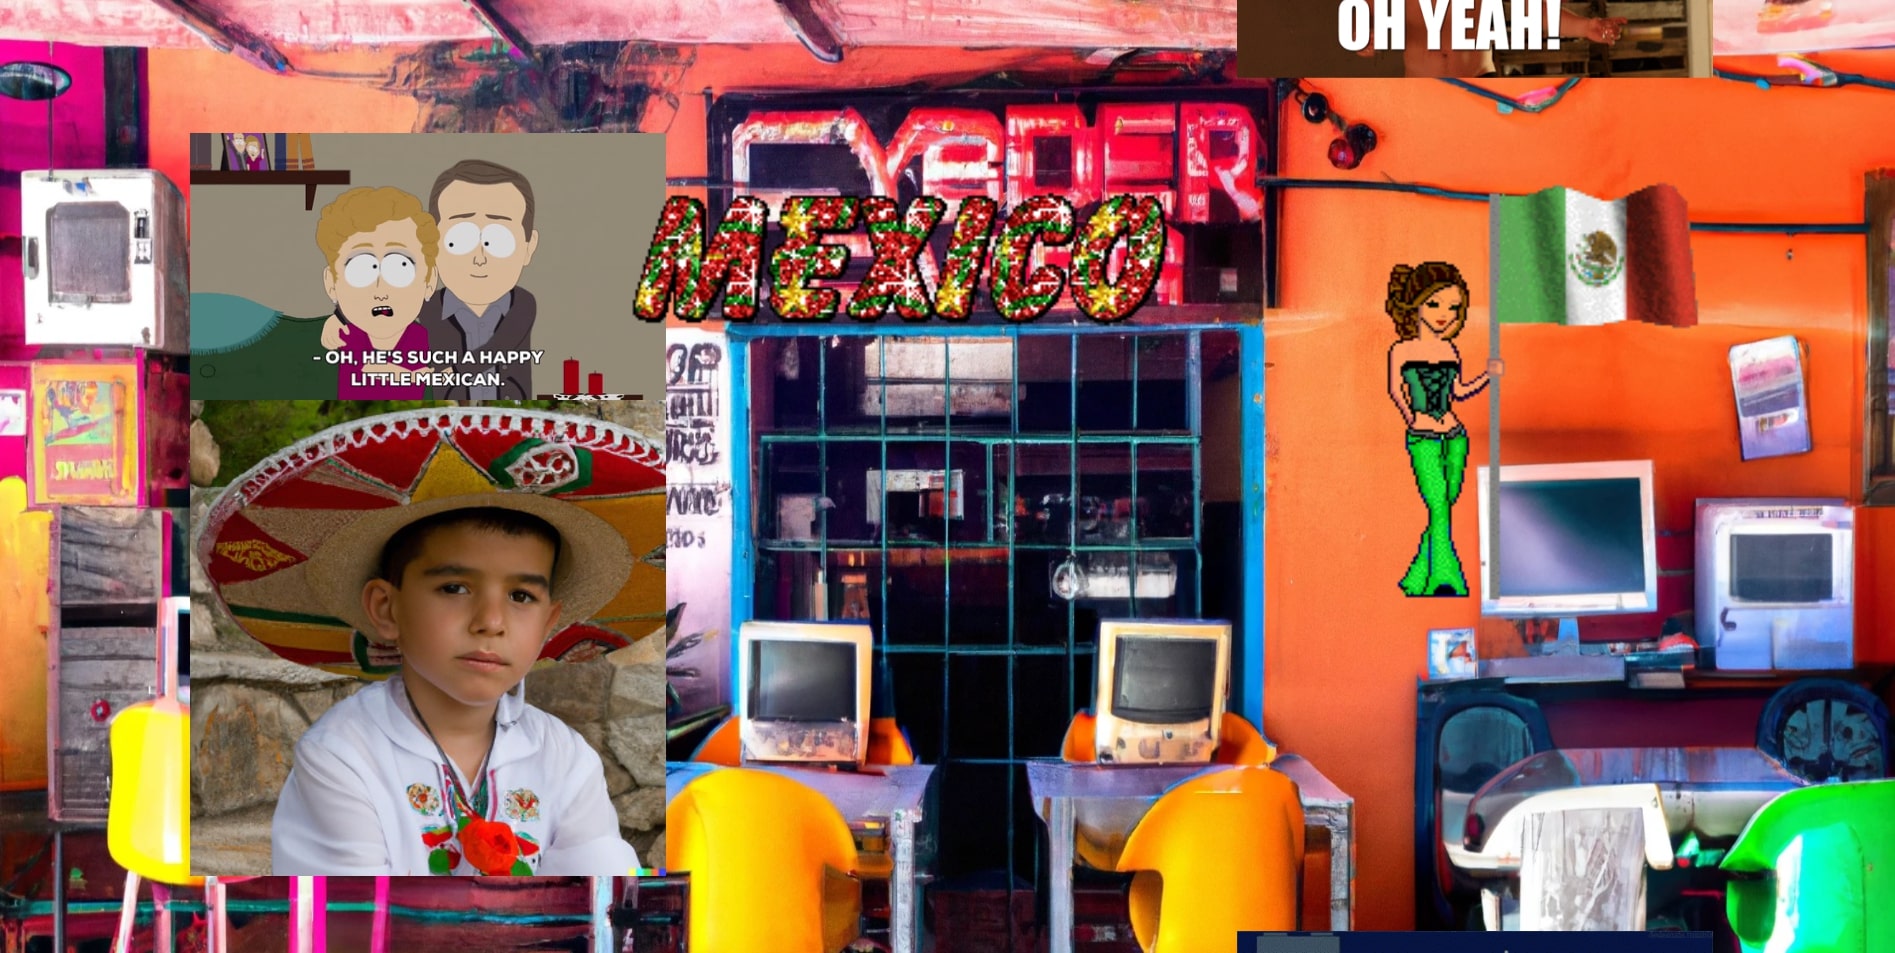 A screenshot of a brightly colored webpage with a collage of images showing stereotypical representations of Mexican people